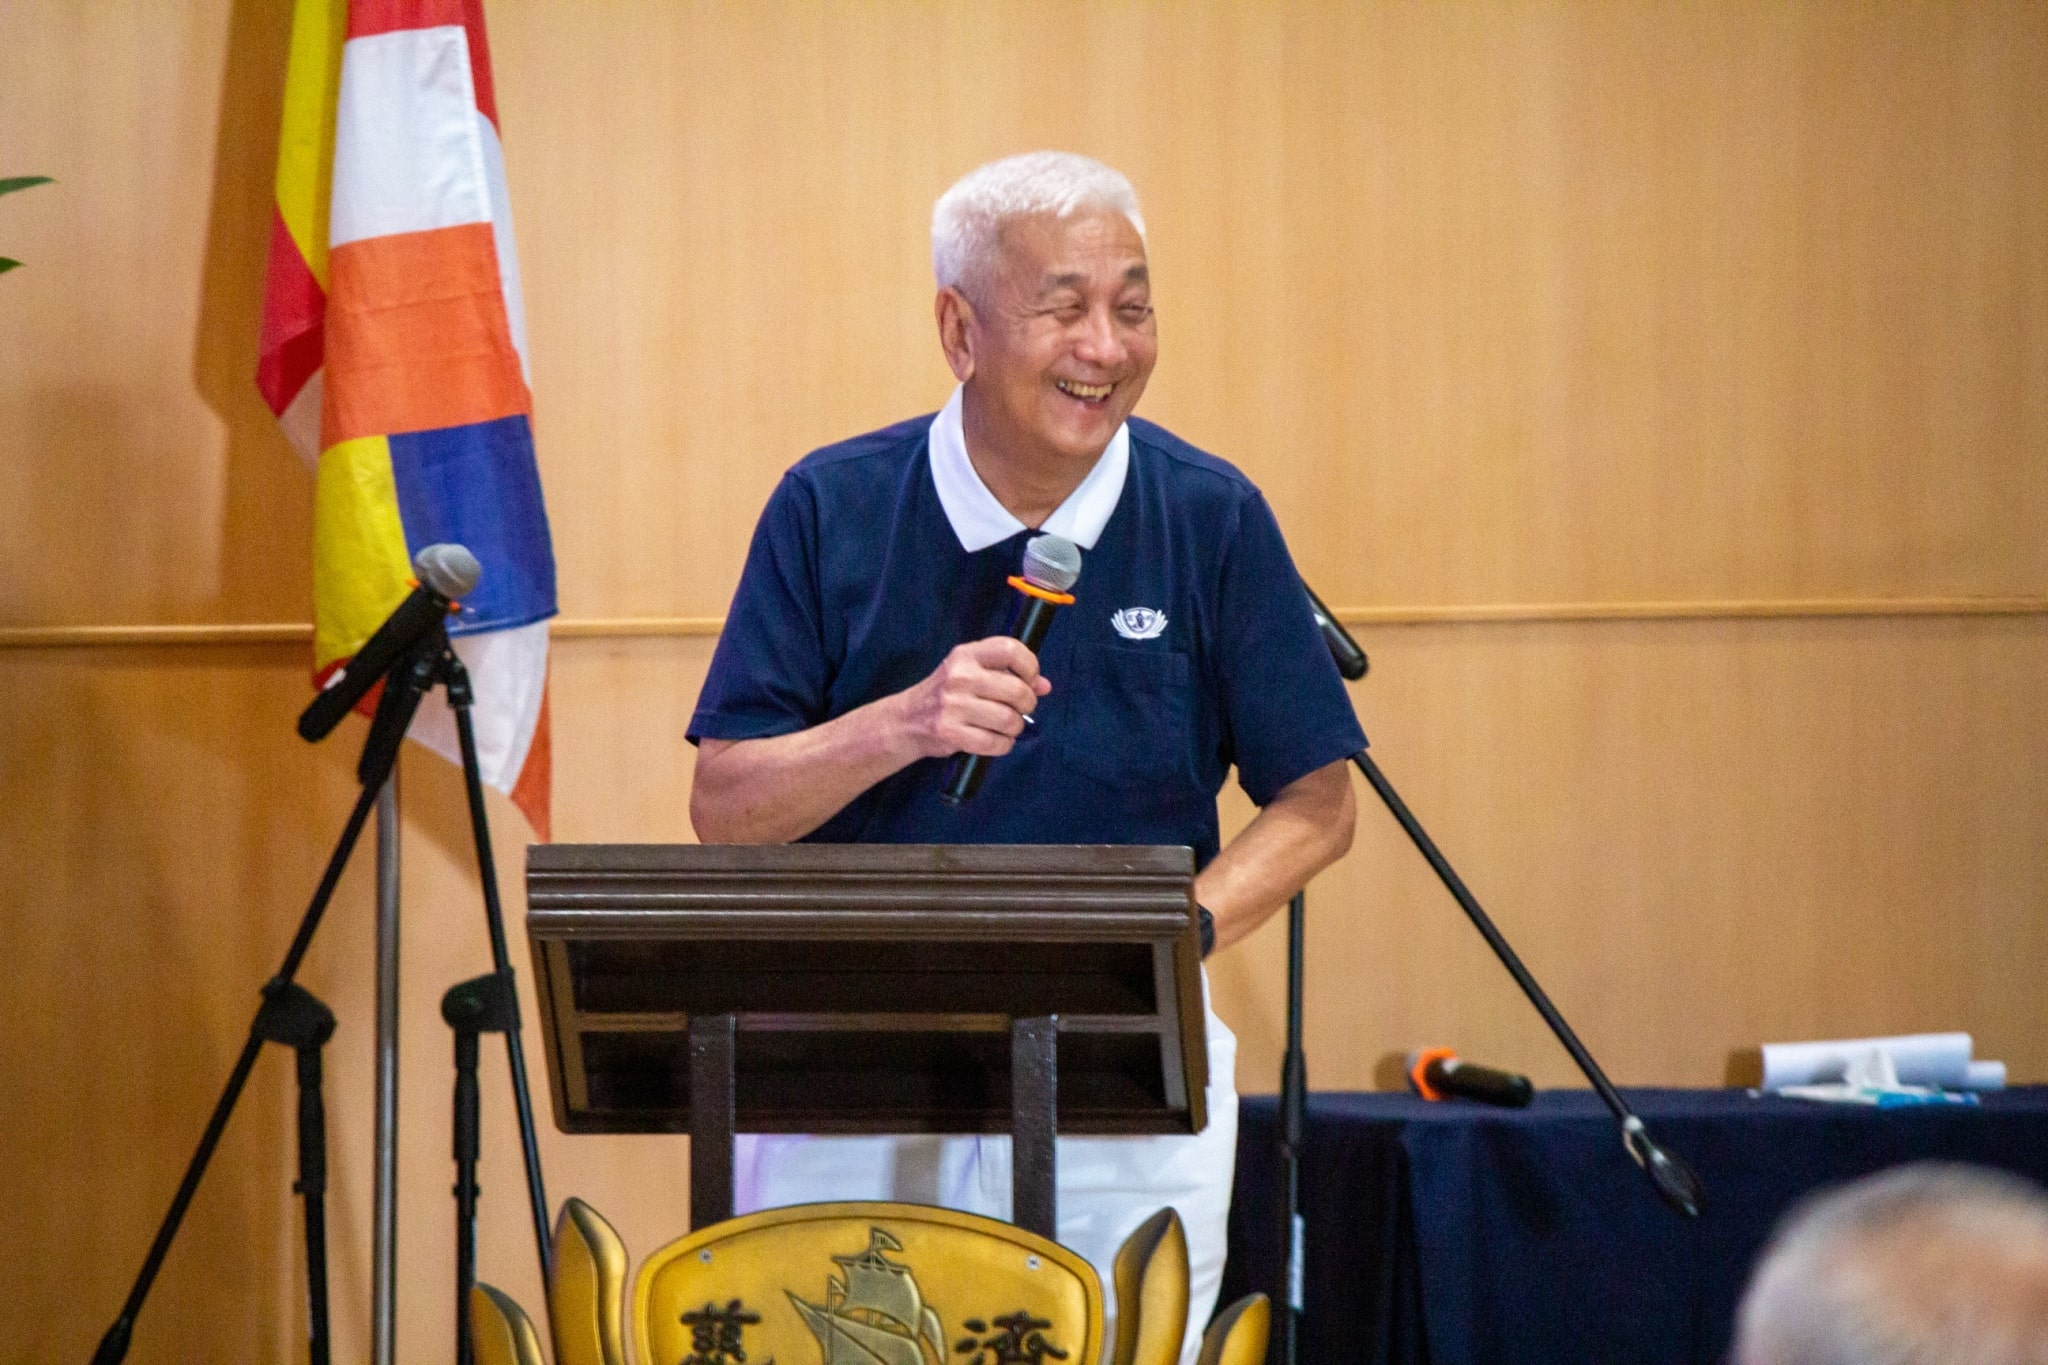 Tzu Chi Philippines CEO Henry Yuñez says physical therapy and acupuncture services are part of Tzu Chi’s 5-year vision. “We started with nothing until we grew and spread to different regions,” says the CEO. “Now we can do more.”【Photo by Marella Saldonido】